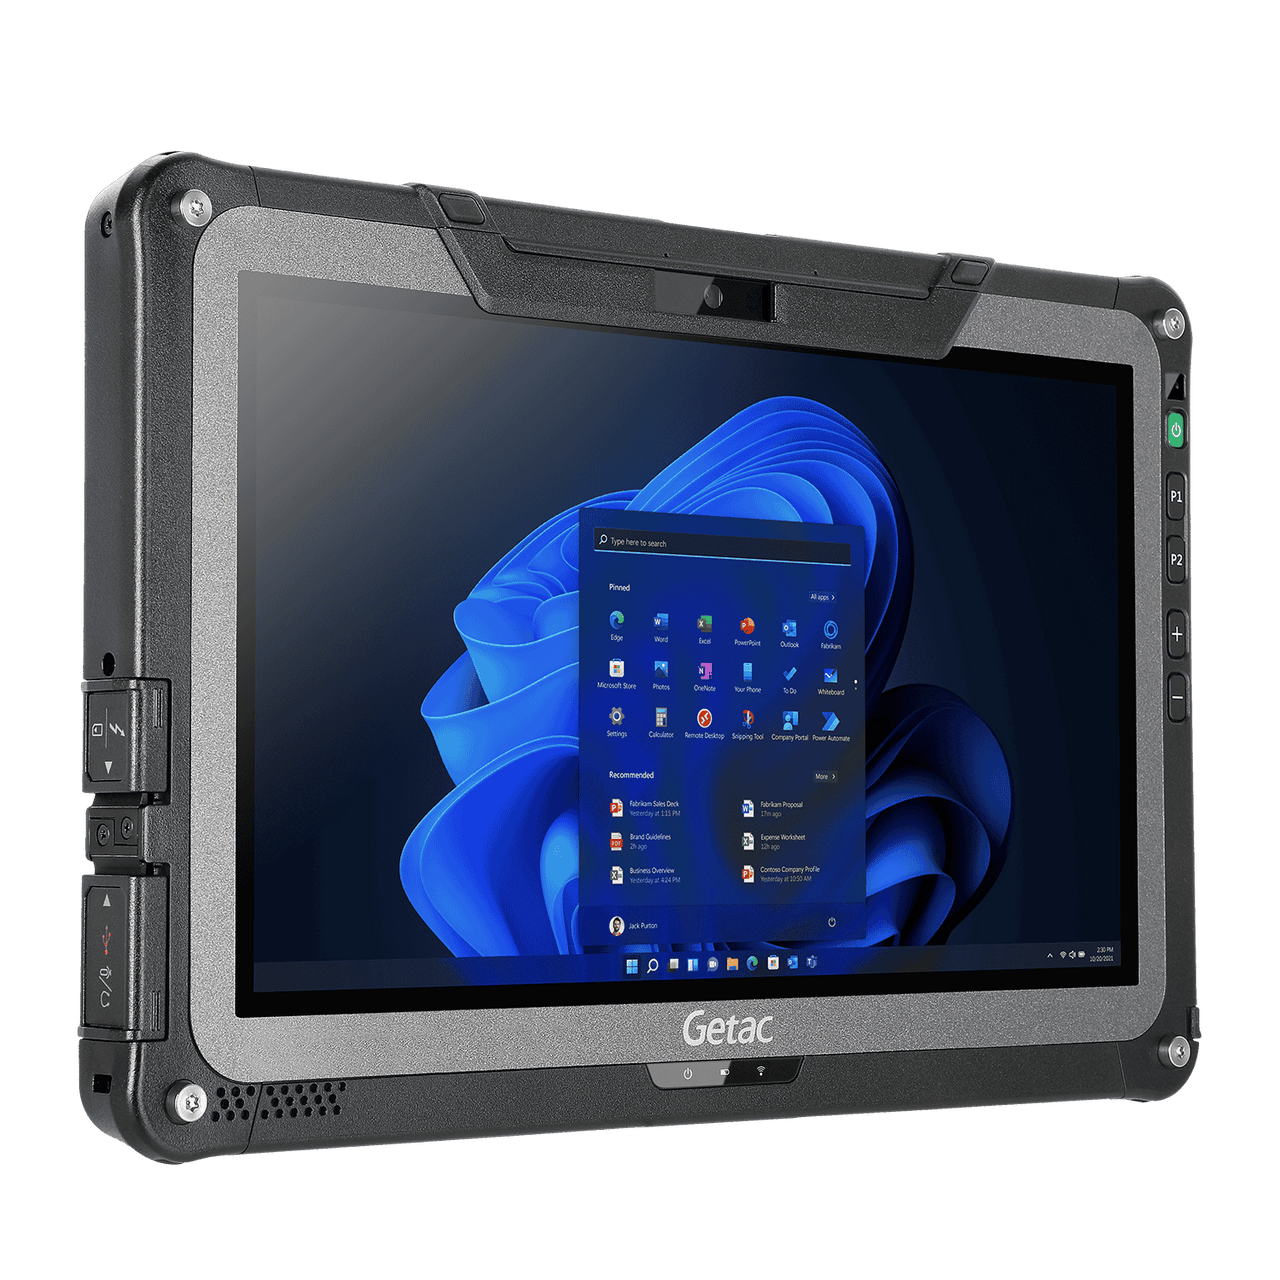 Getac F110 G5 TAA-i5-8265U 1.6GHz, 11.6(W/out Webcam), Win10 Pro x64 w/16GB RAM + TAA, 512GB PCIe SSD, SR (FHD LCD+ Touchscreenstylus), US PC, (W/out Rear Camera), WiFi + BT, Barcode Reader, CAC Reader, 3yb2b